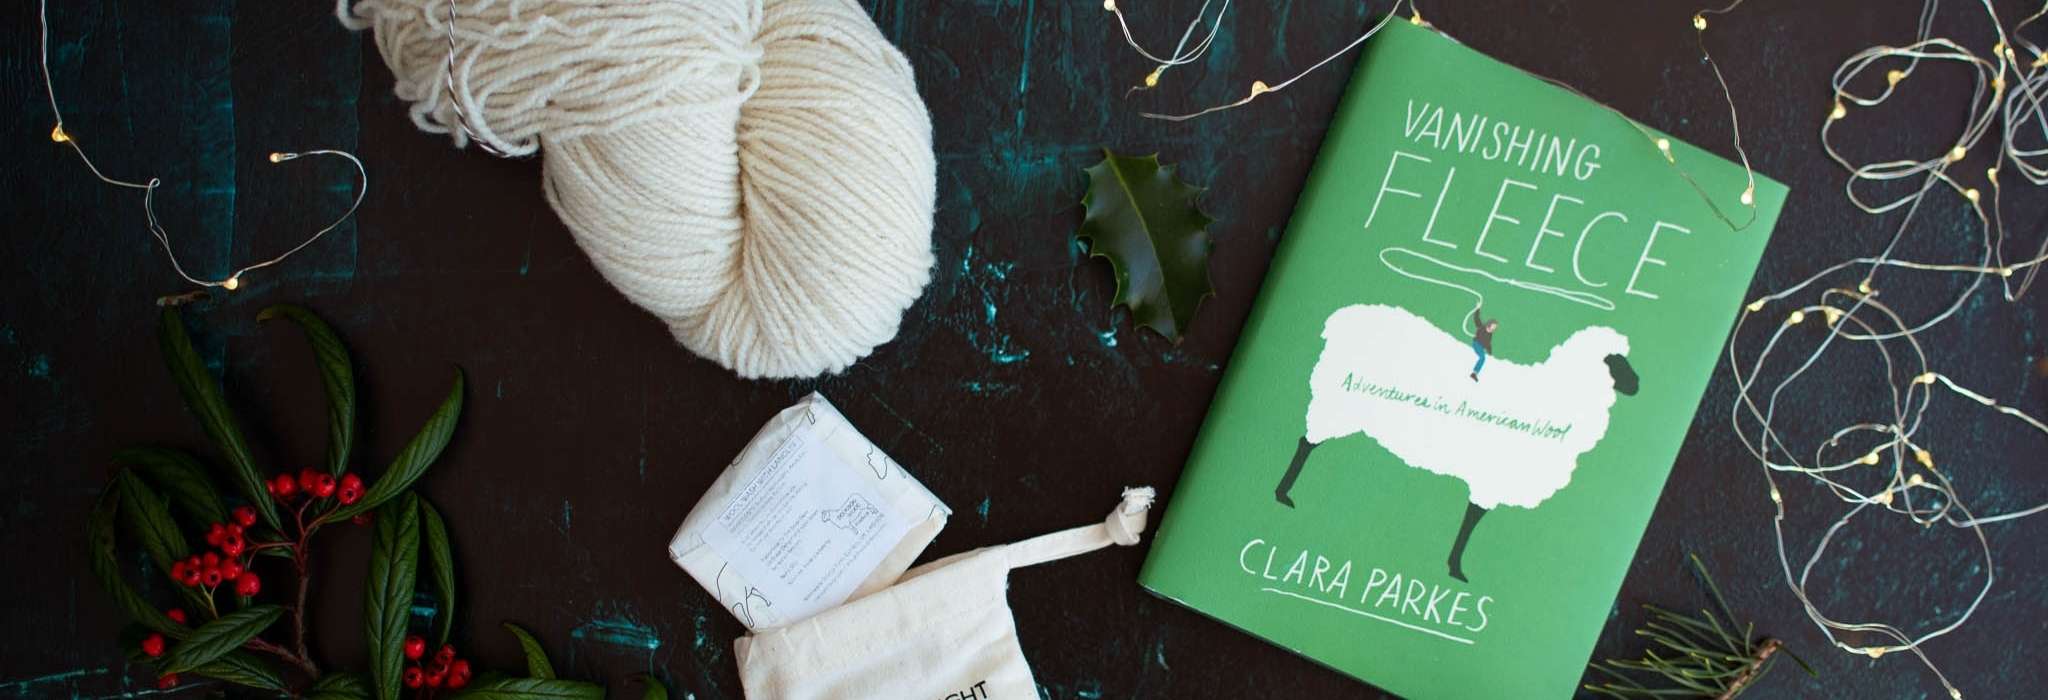 A skein of white yarn, a bar of soap with a cotton drawstring bag and a green book with a drawing of a white sheep on the cover called 'Vanishing Fleece' lie on a dark, flat surface with twinkle lights to the side.